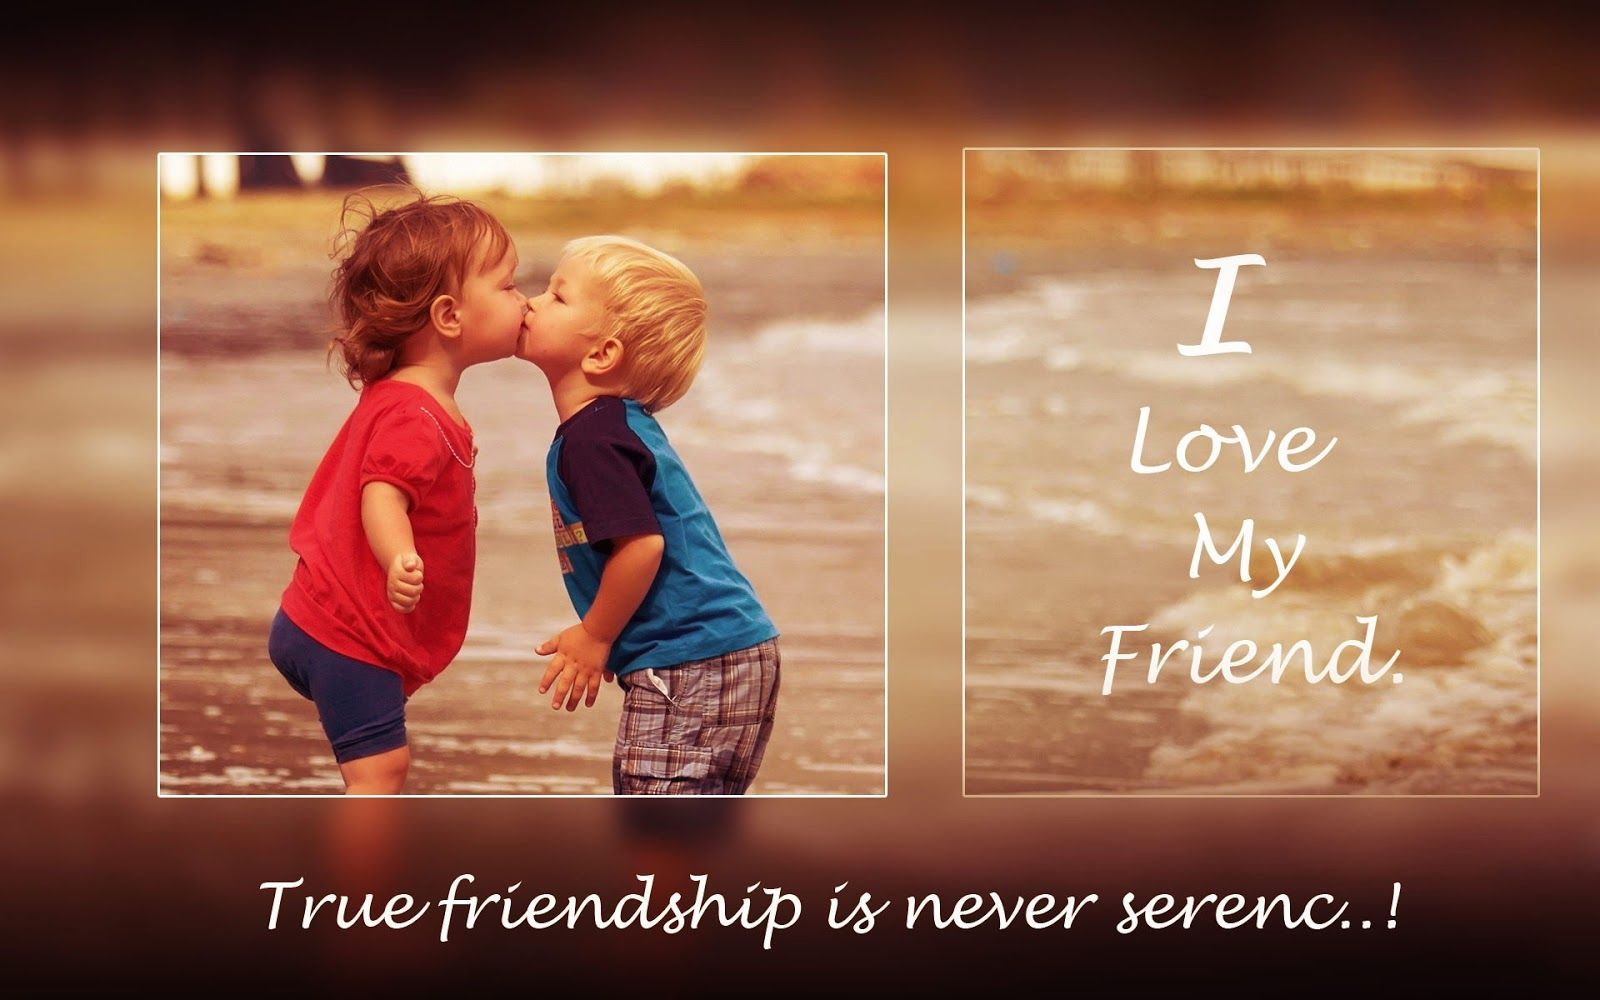 I Love My Friends Images Wallpapers